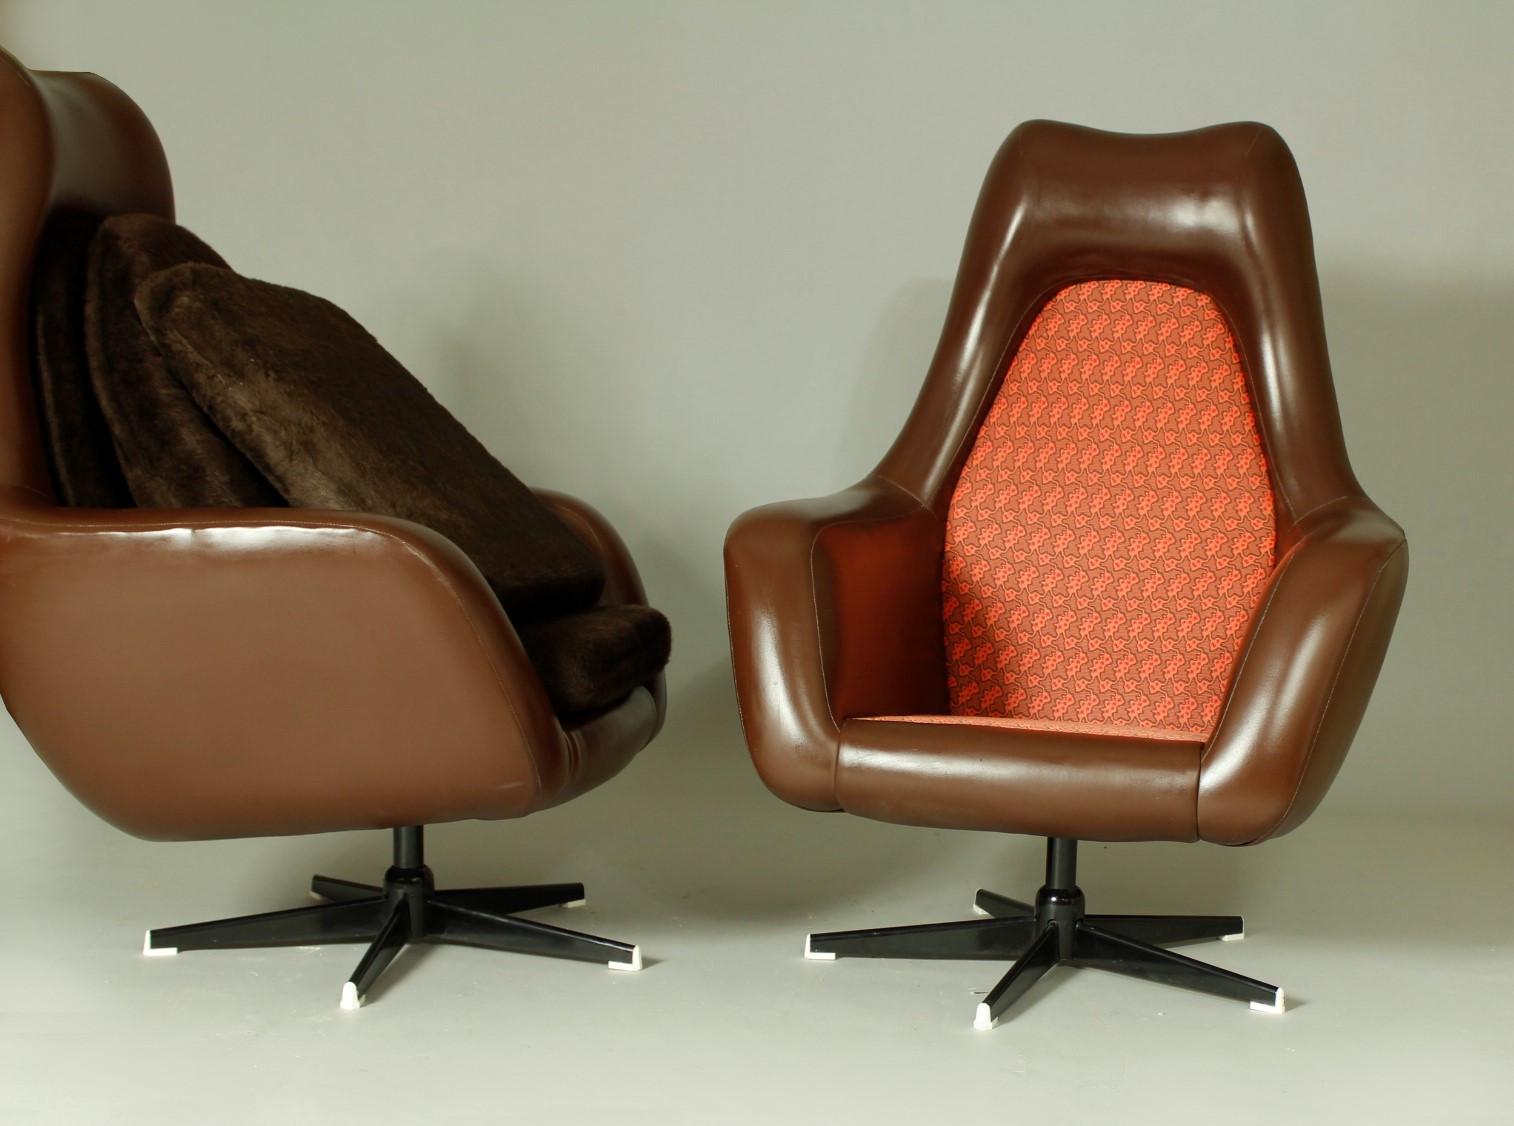 Pair of swivel egg chairs from the 1970s. These chairs with black painted steel base are upholstered with vinyl, each of them contains two fabric cushions for comfortable seating. They are in very good vintage condition with several light scratches,